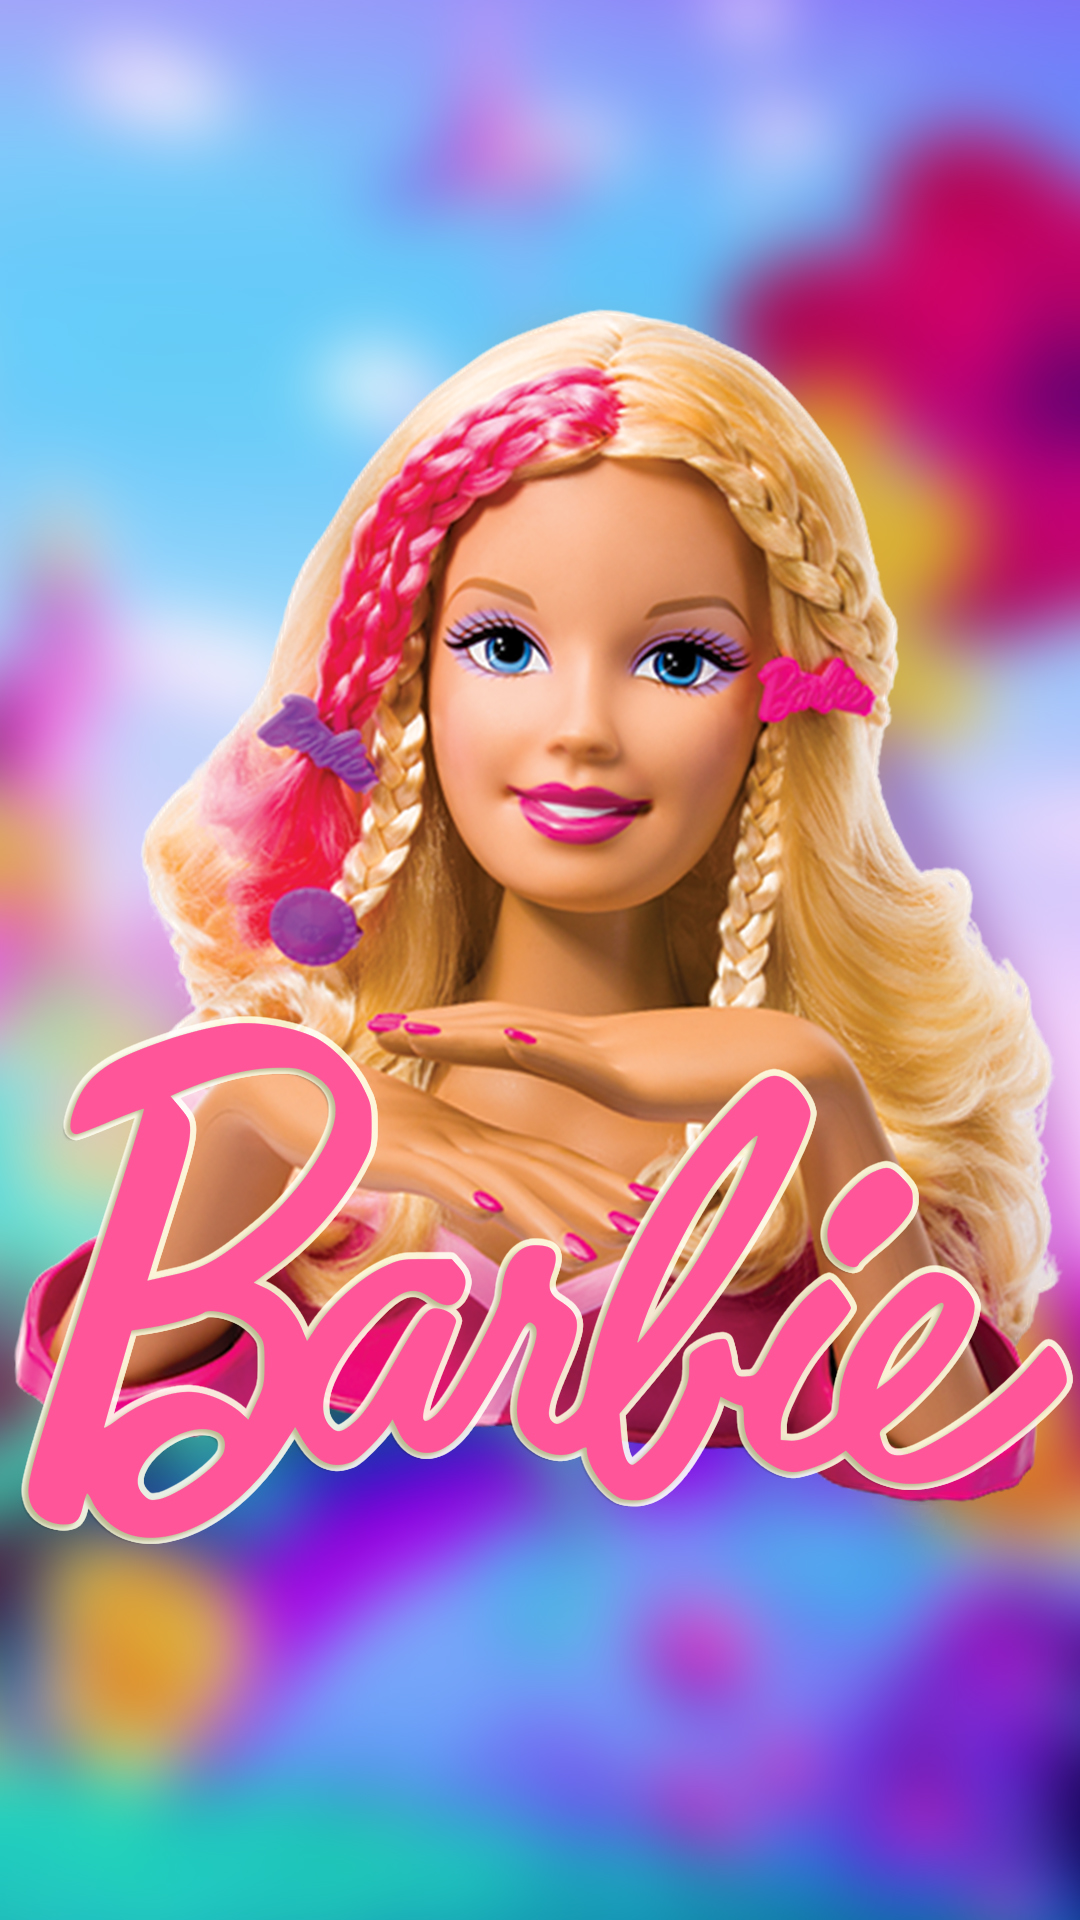 Phones for barbies